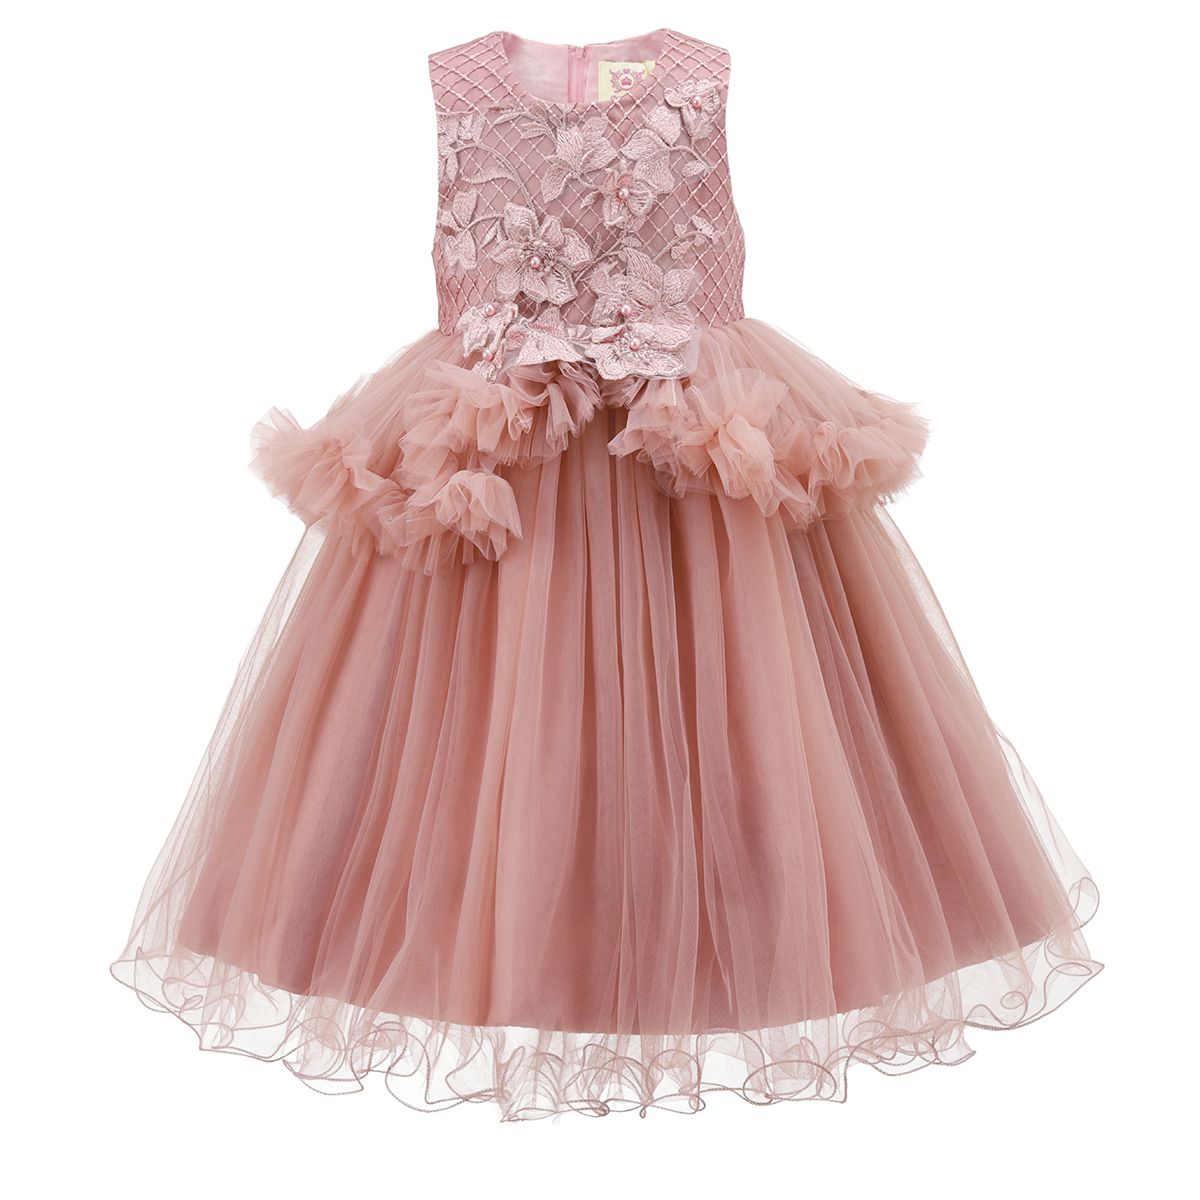 Dusty Pink Ruffle Floral Overlay Dress